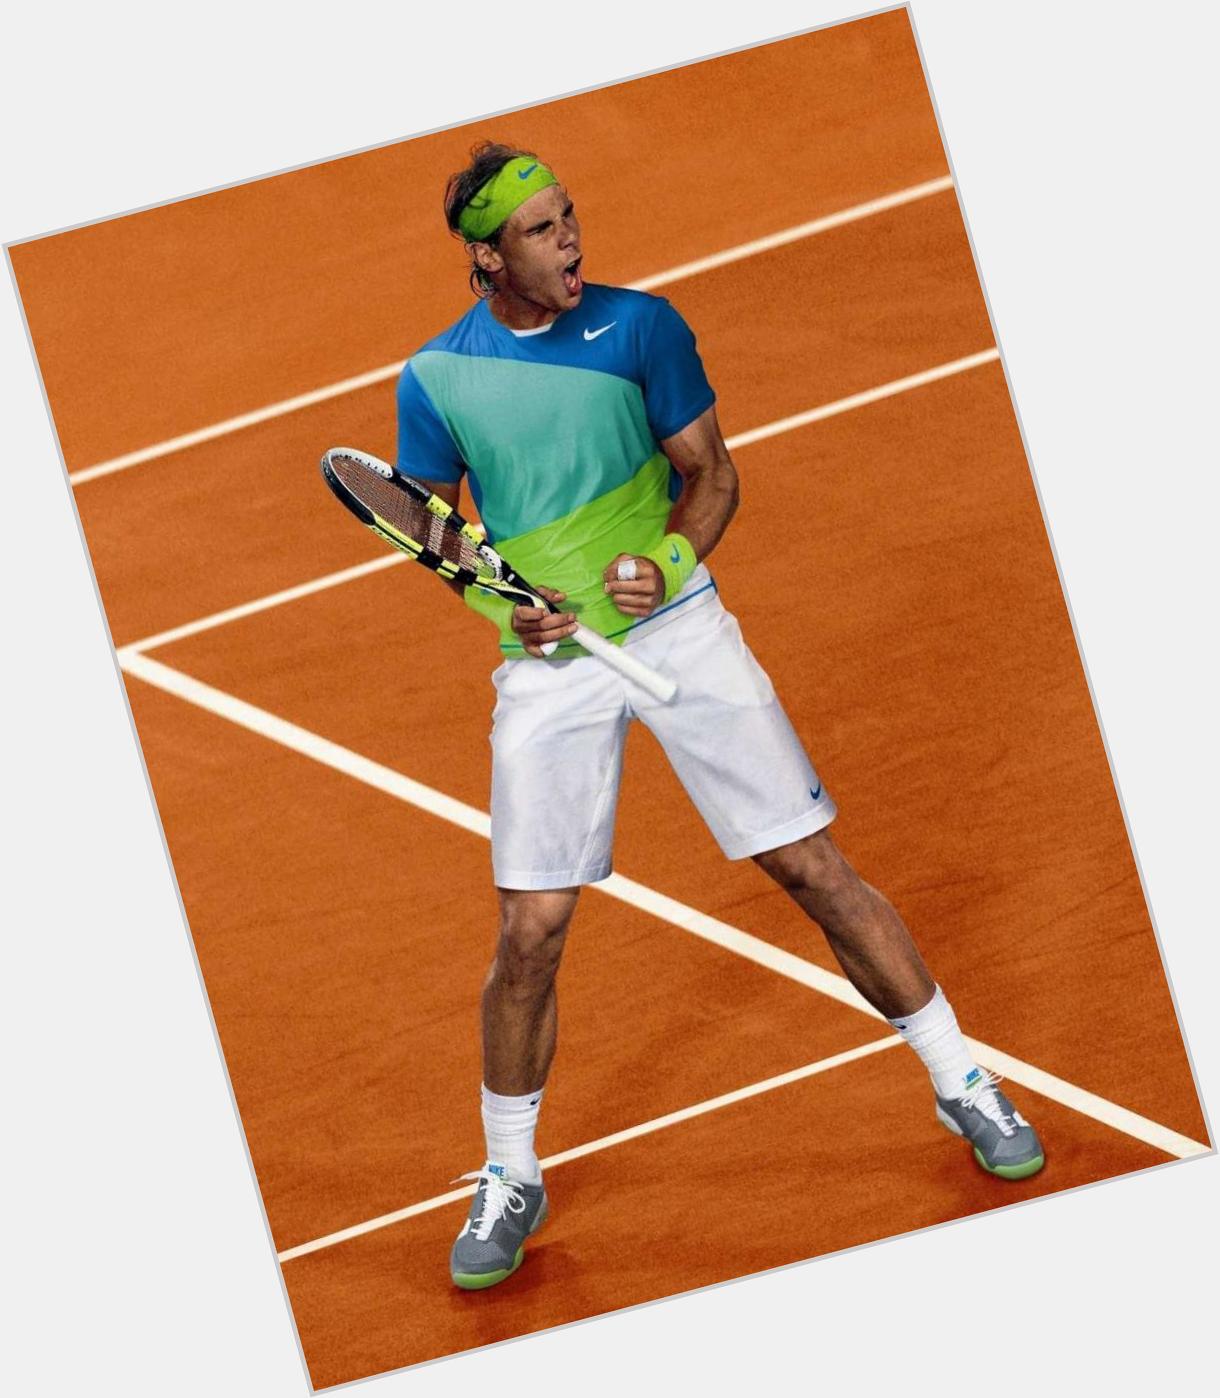 Happy Birthday Rafael Nadal! Best of luck for the   